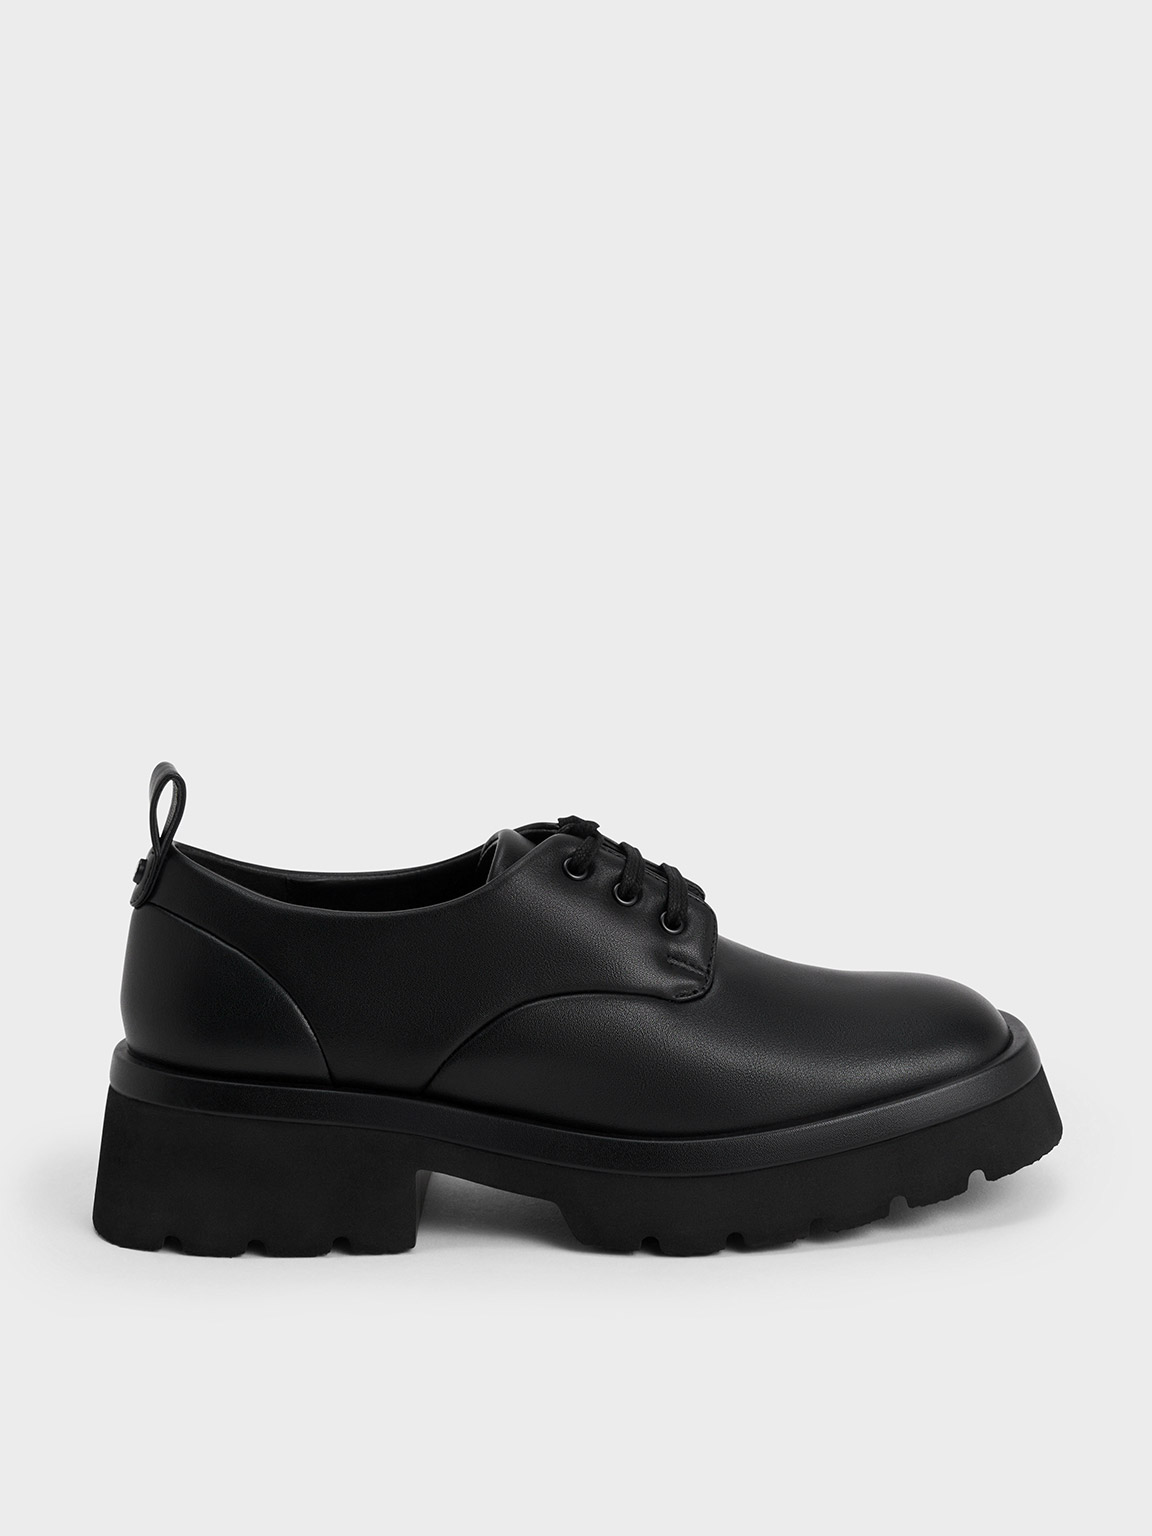 Black Ridged Sole Lace-Up Oxfords - CHARLES & KEITH UK